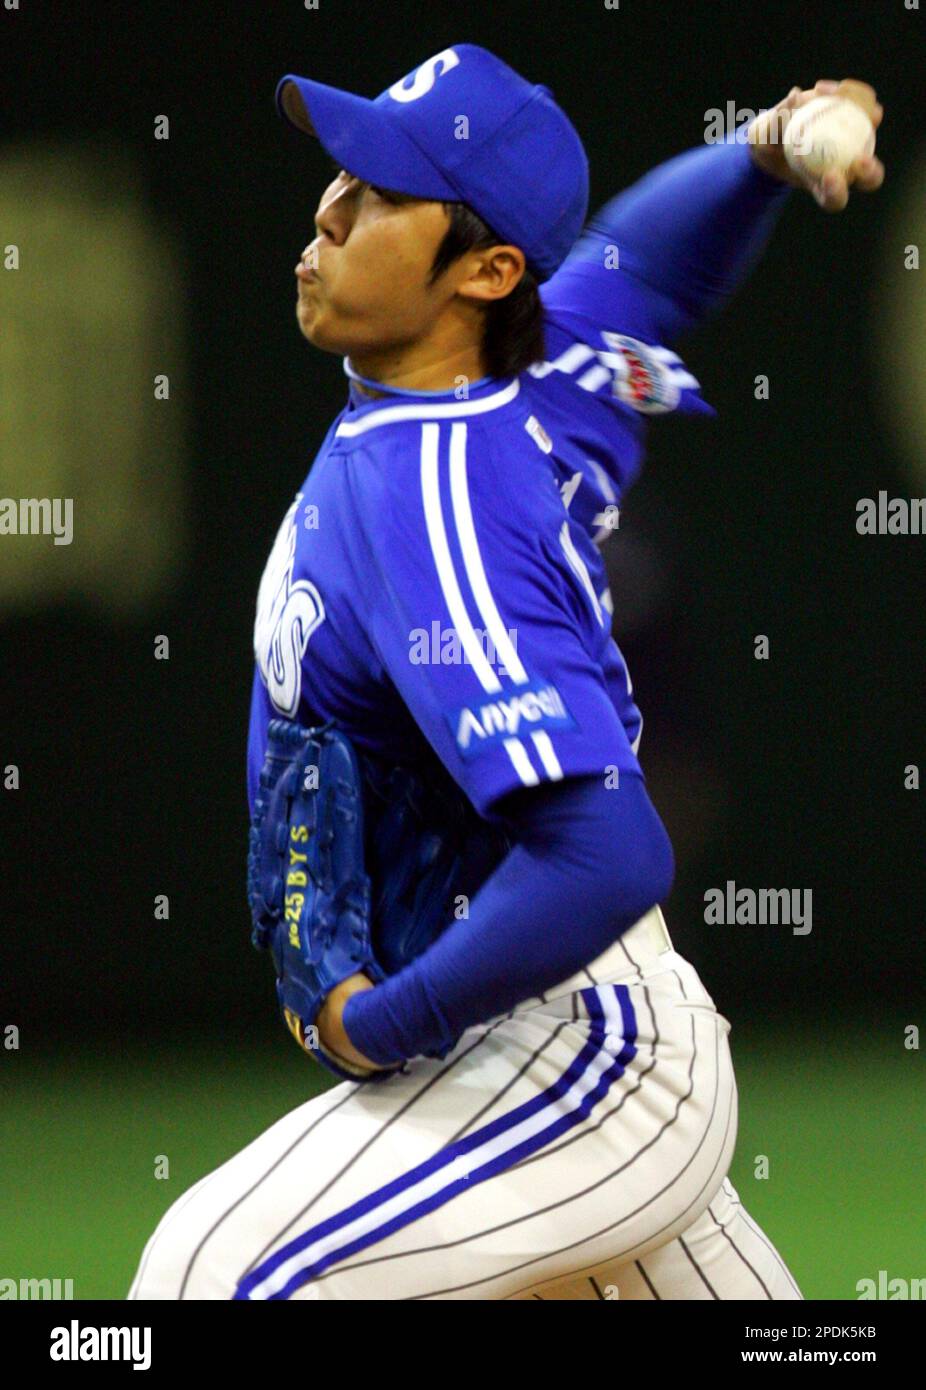 South Koreas Samsung Lions starter Bae Young-soo pitches against the Japans Chiba Lotte Marines during the final game of the Asia Series pro-baseball championships in Tokyo Sunday, Nov 13, 2005